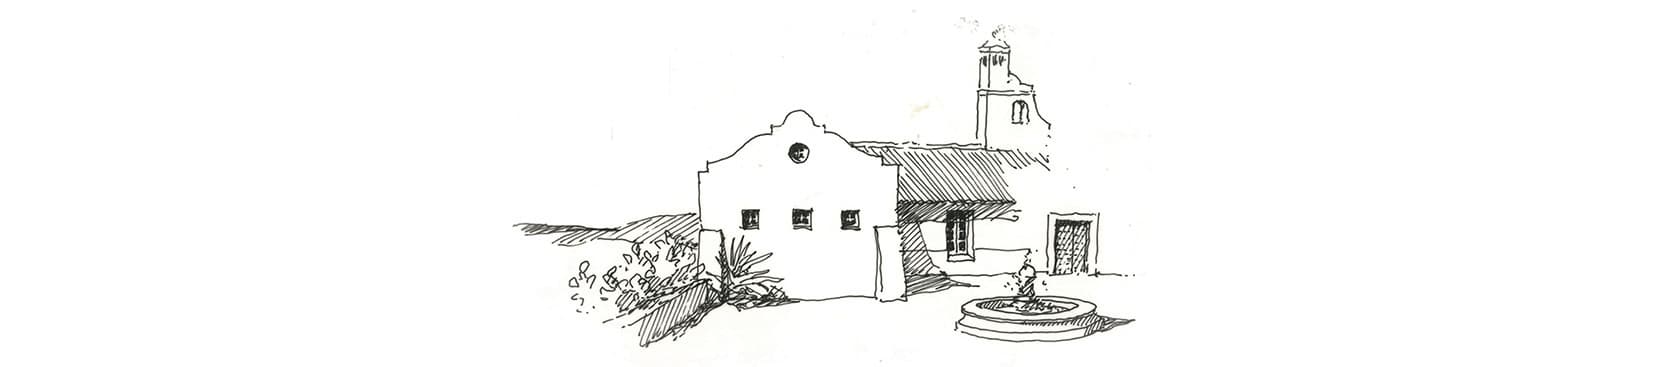 Sketch of the ranch house